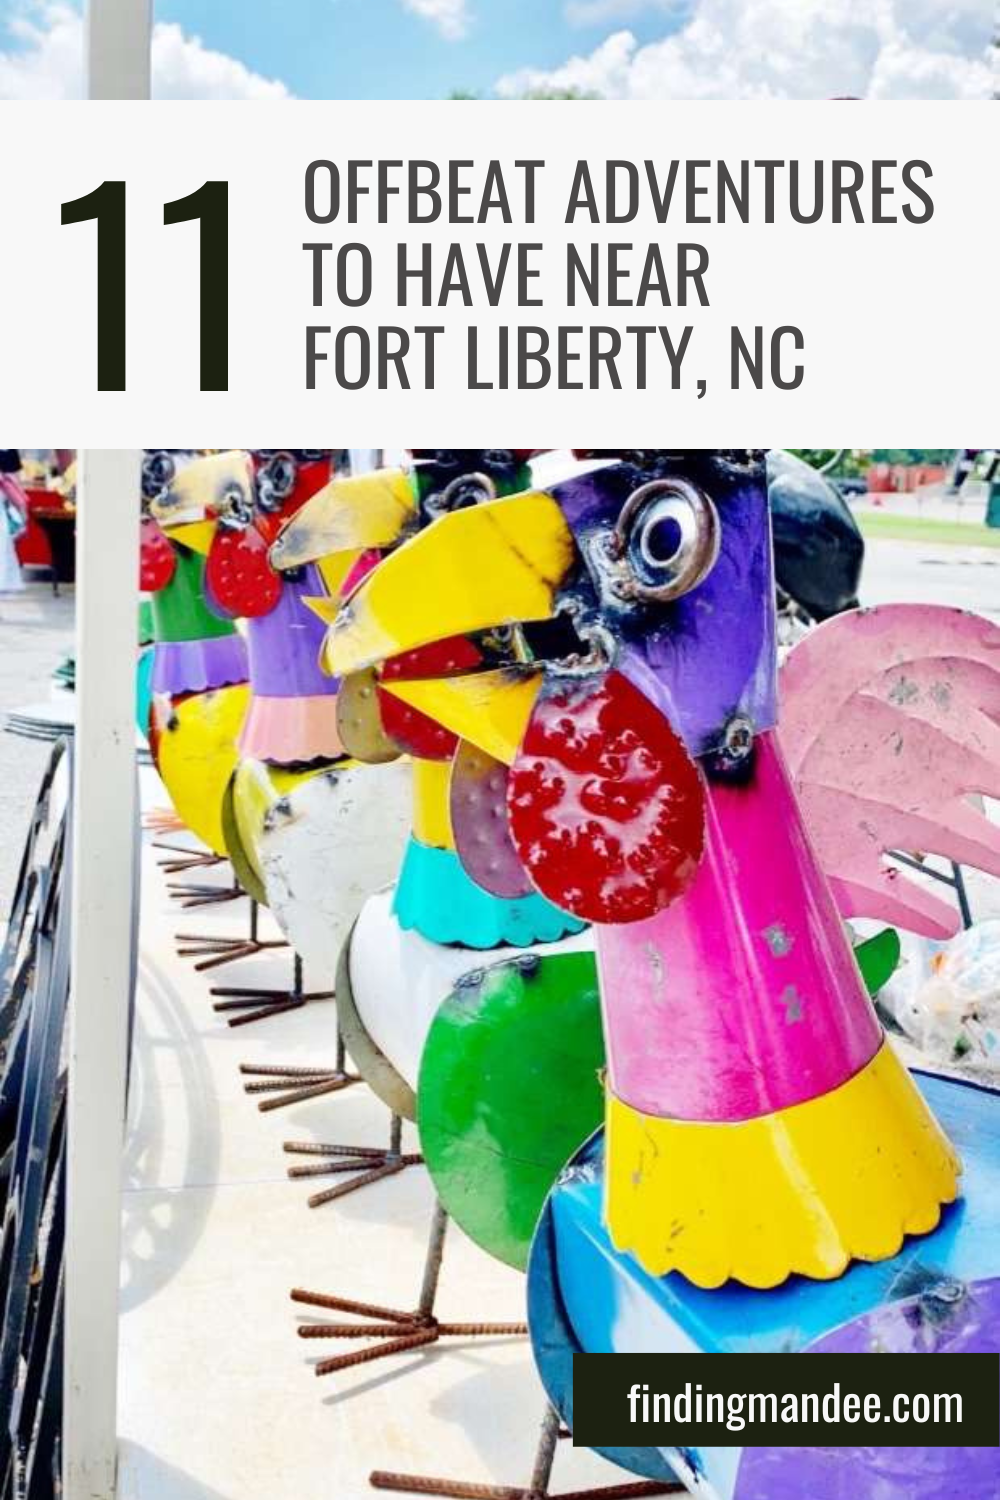 11 Offbeat Adventures You Don't Want to Miss Near Fort Liberty, NC | Finding Mandee